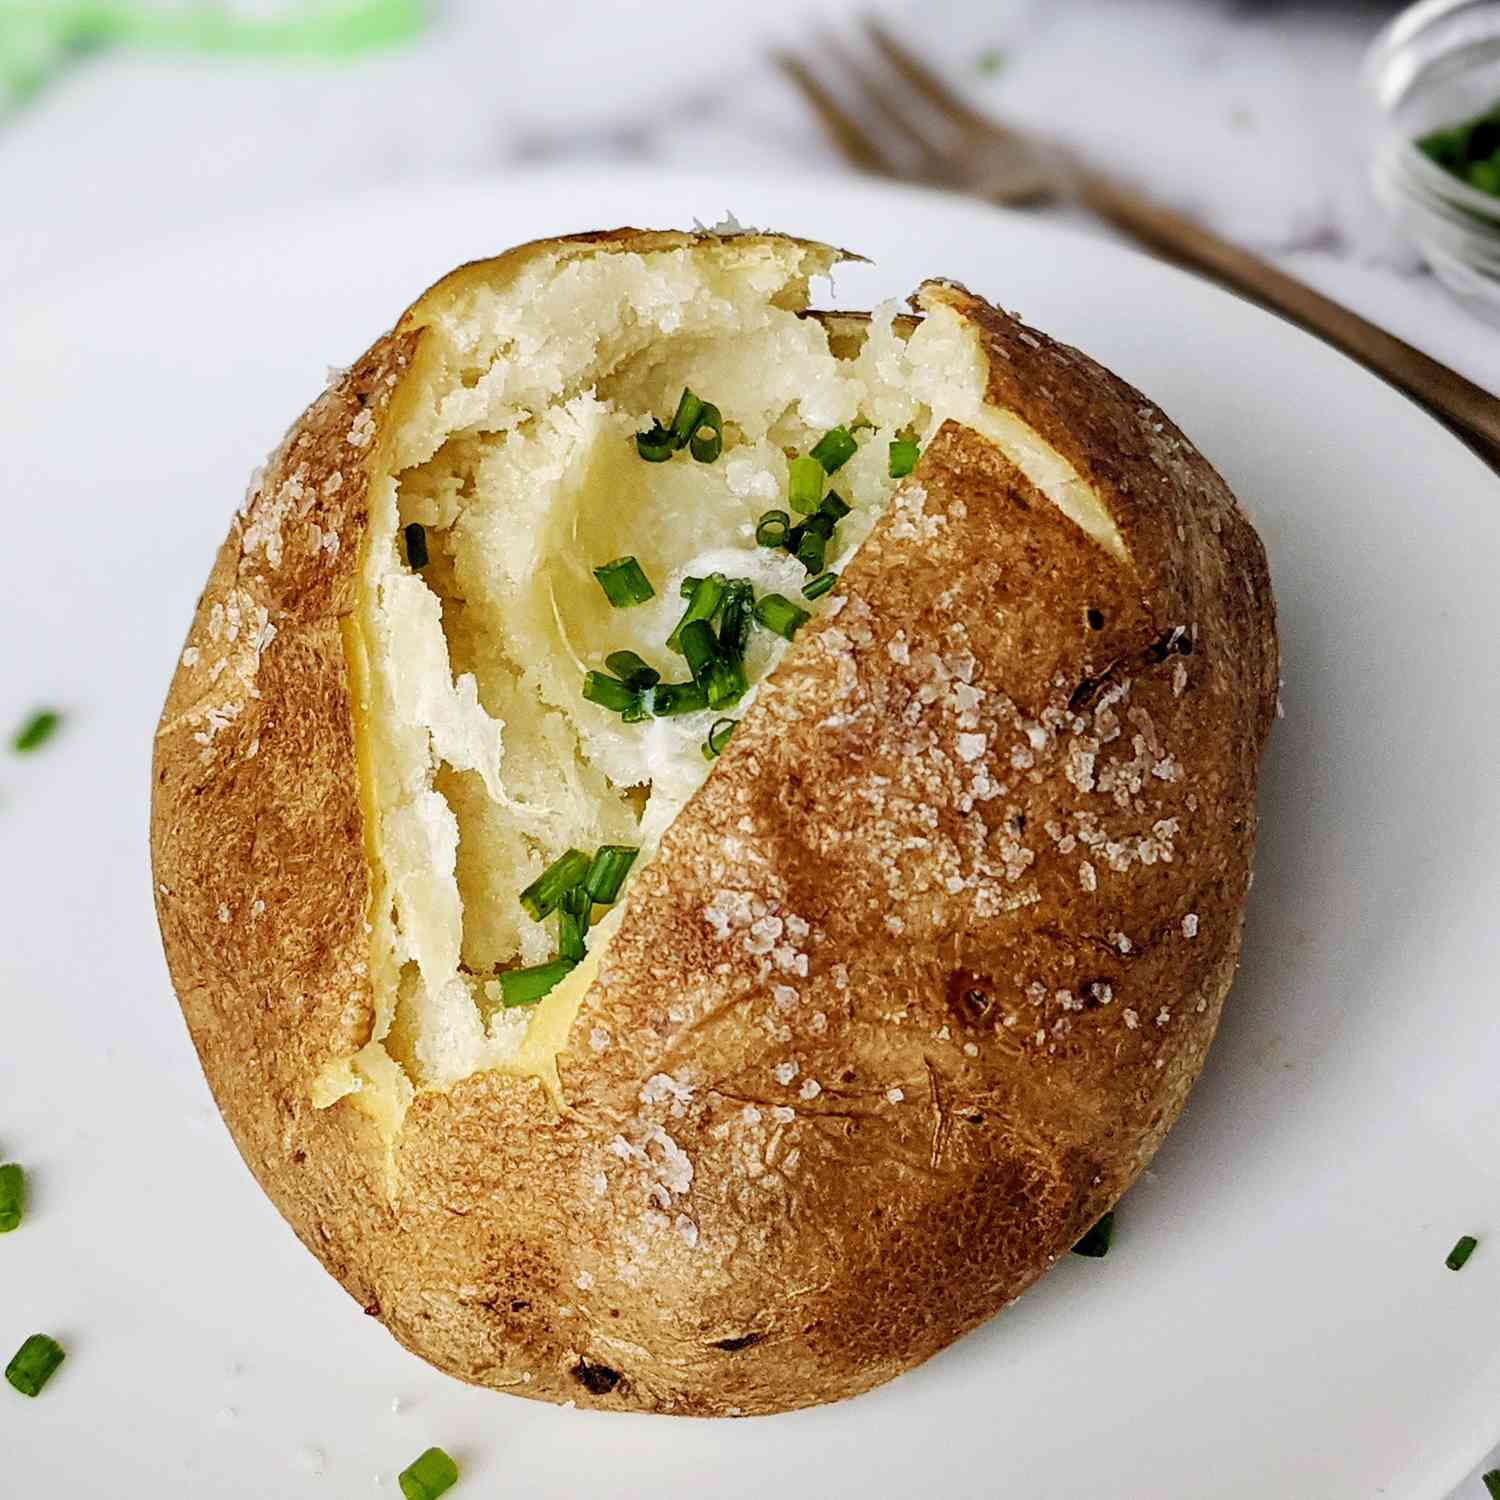 a close up view of a split baked potato dressed with salt, butter, and chives